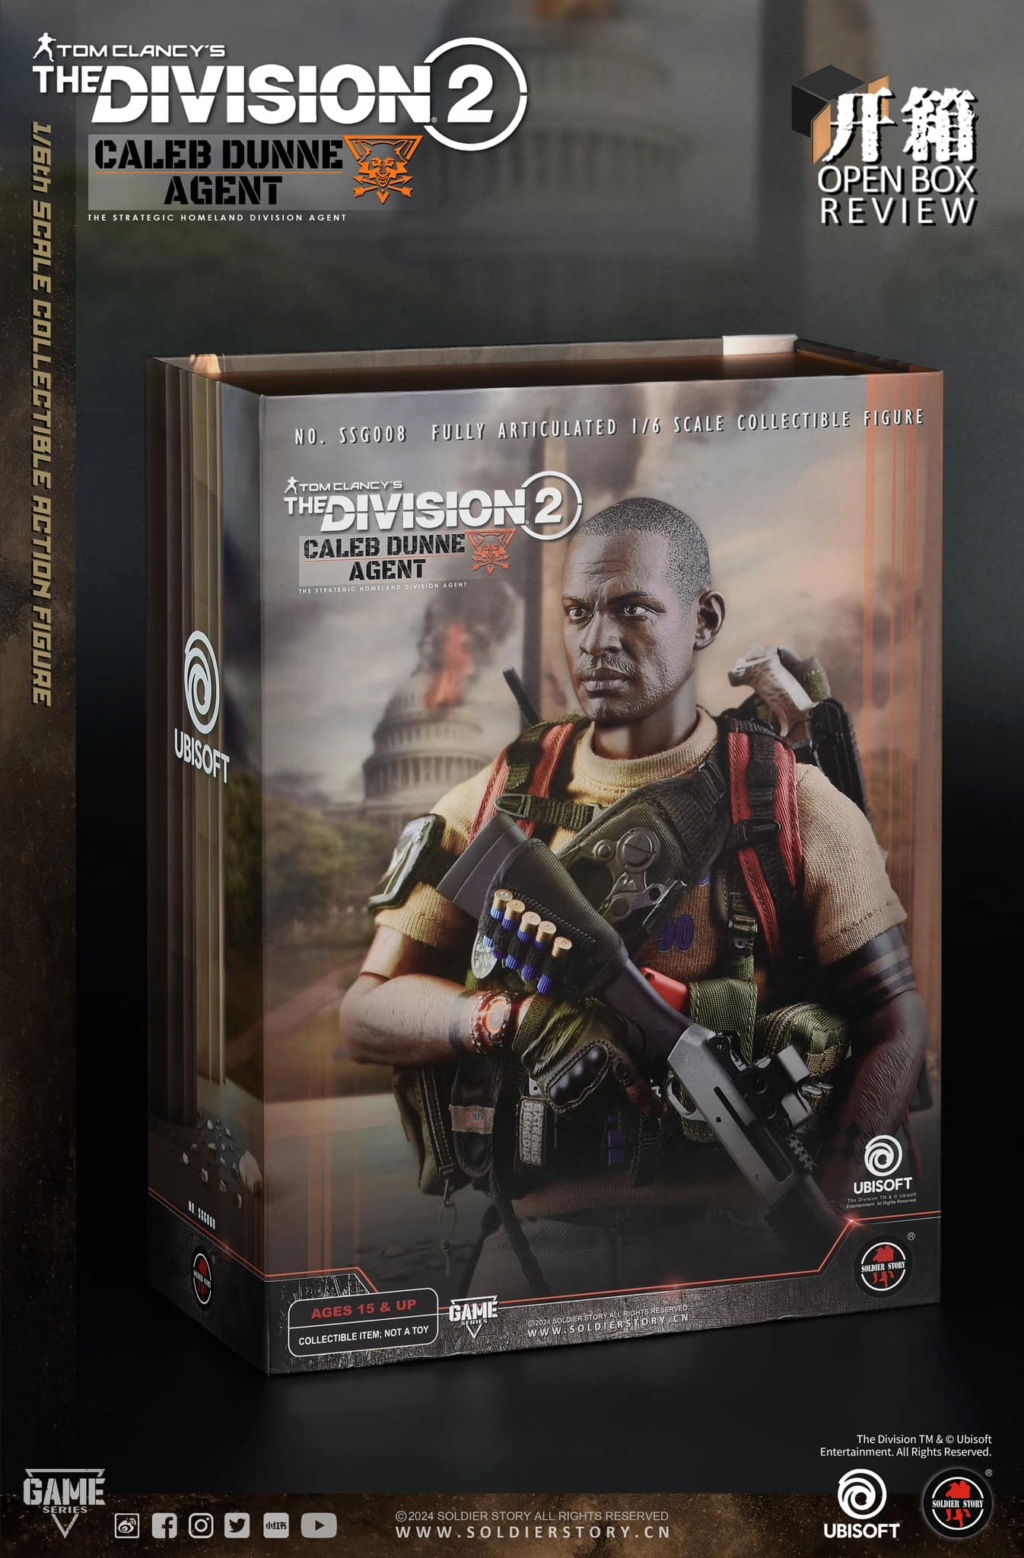 VideoGame-Based - NEW PRODUCT: SOLDIER STORY: #SSG-008 1/6 Scale The Division 2 Agent “Caleb Dunne” Soldie16